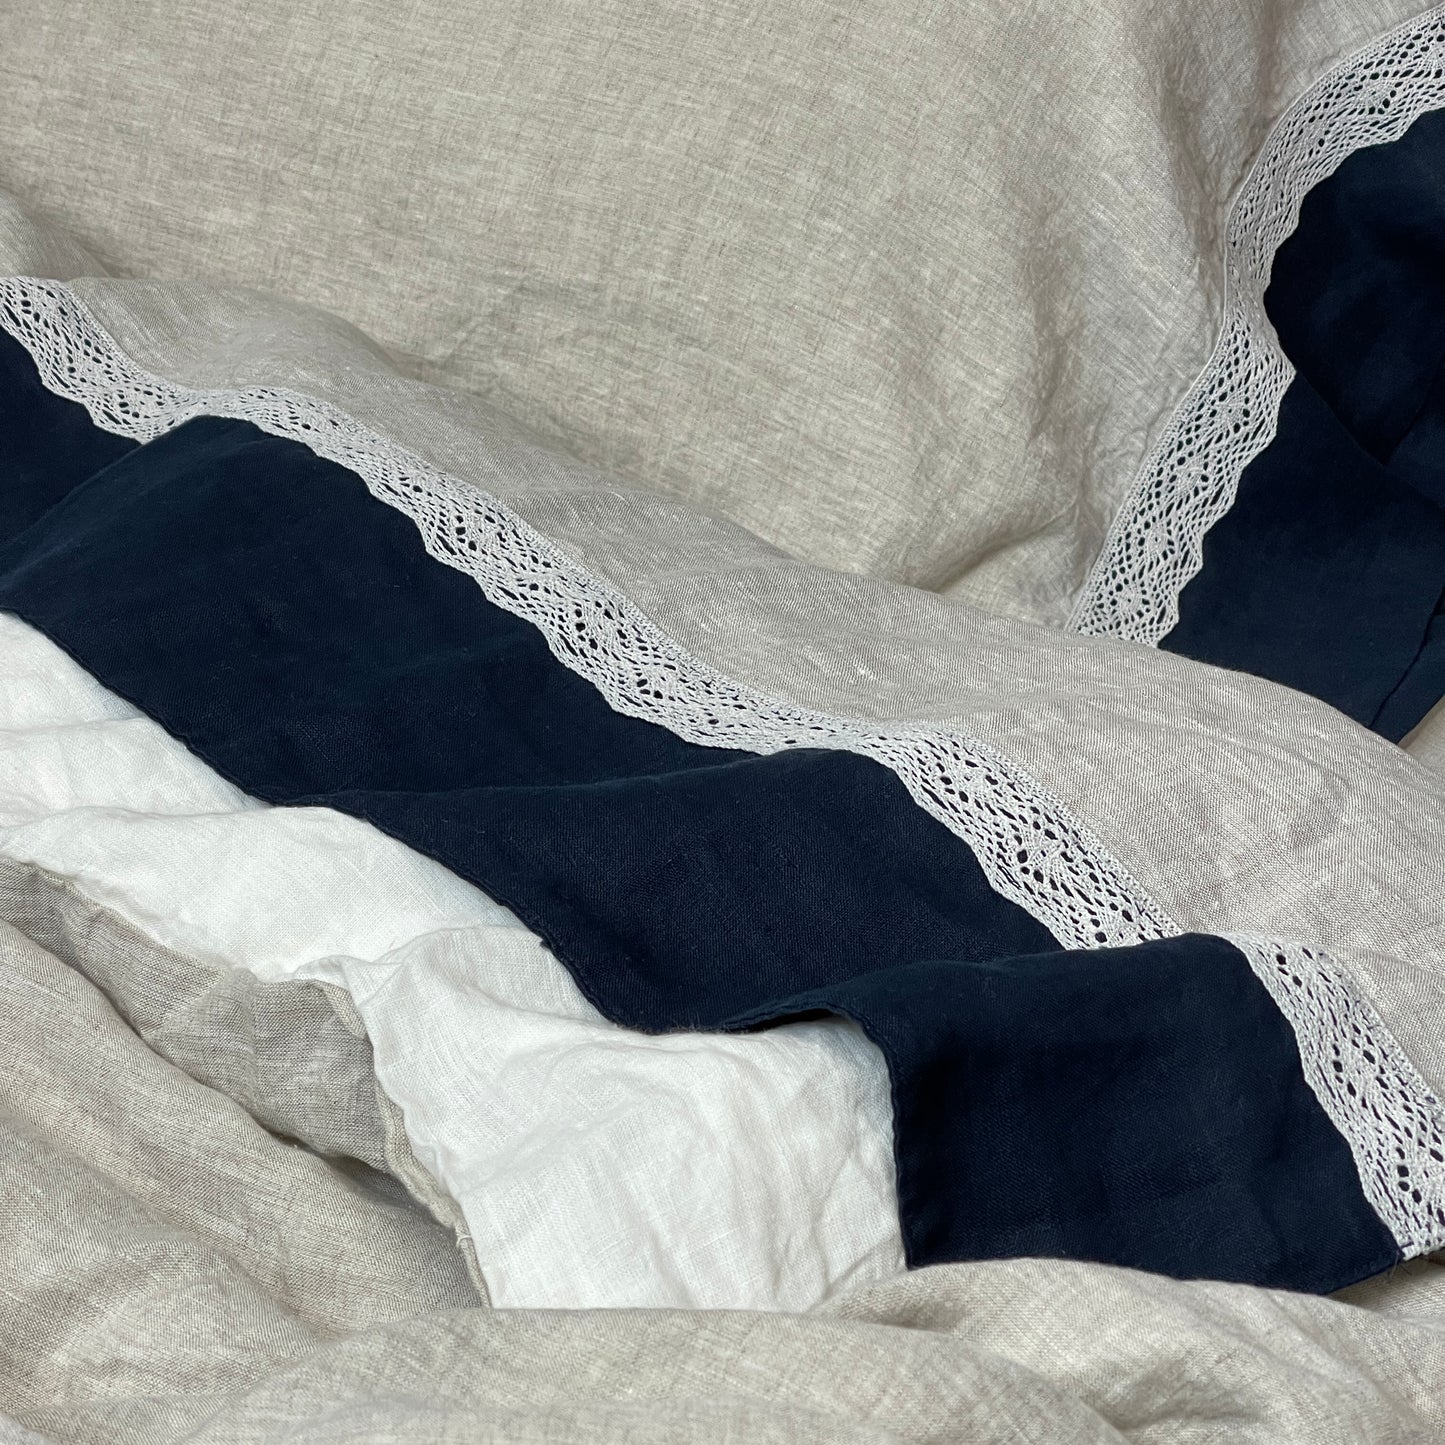 Greige Navy Blue Flat Sheet with Lace